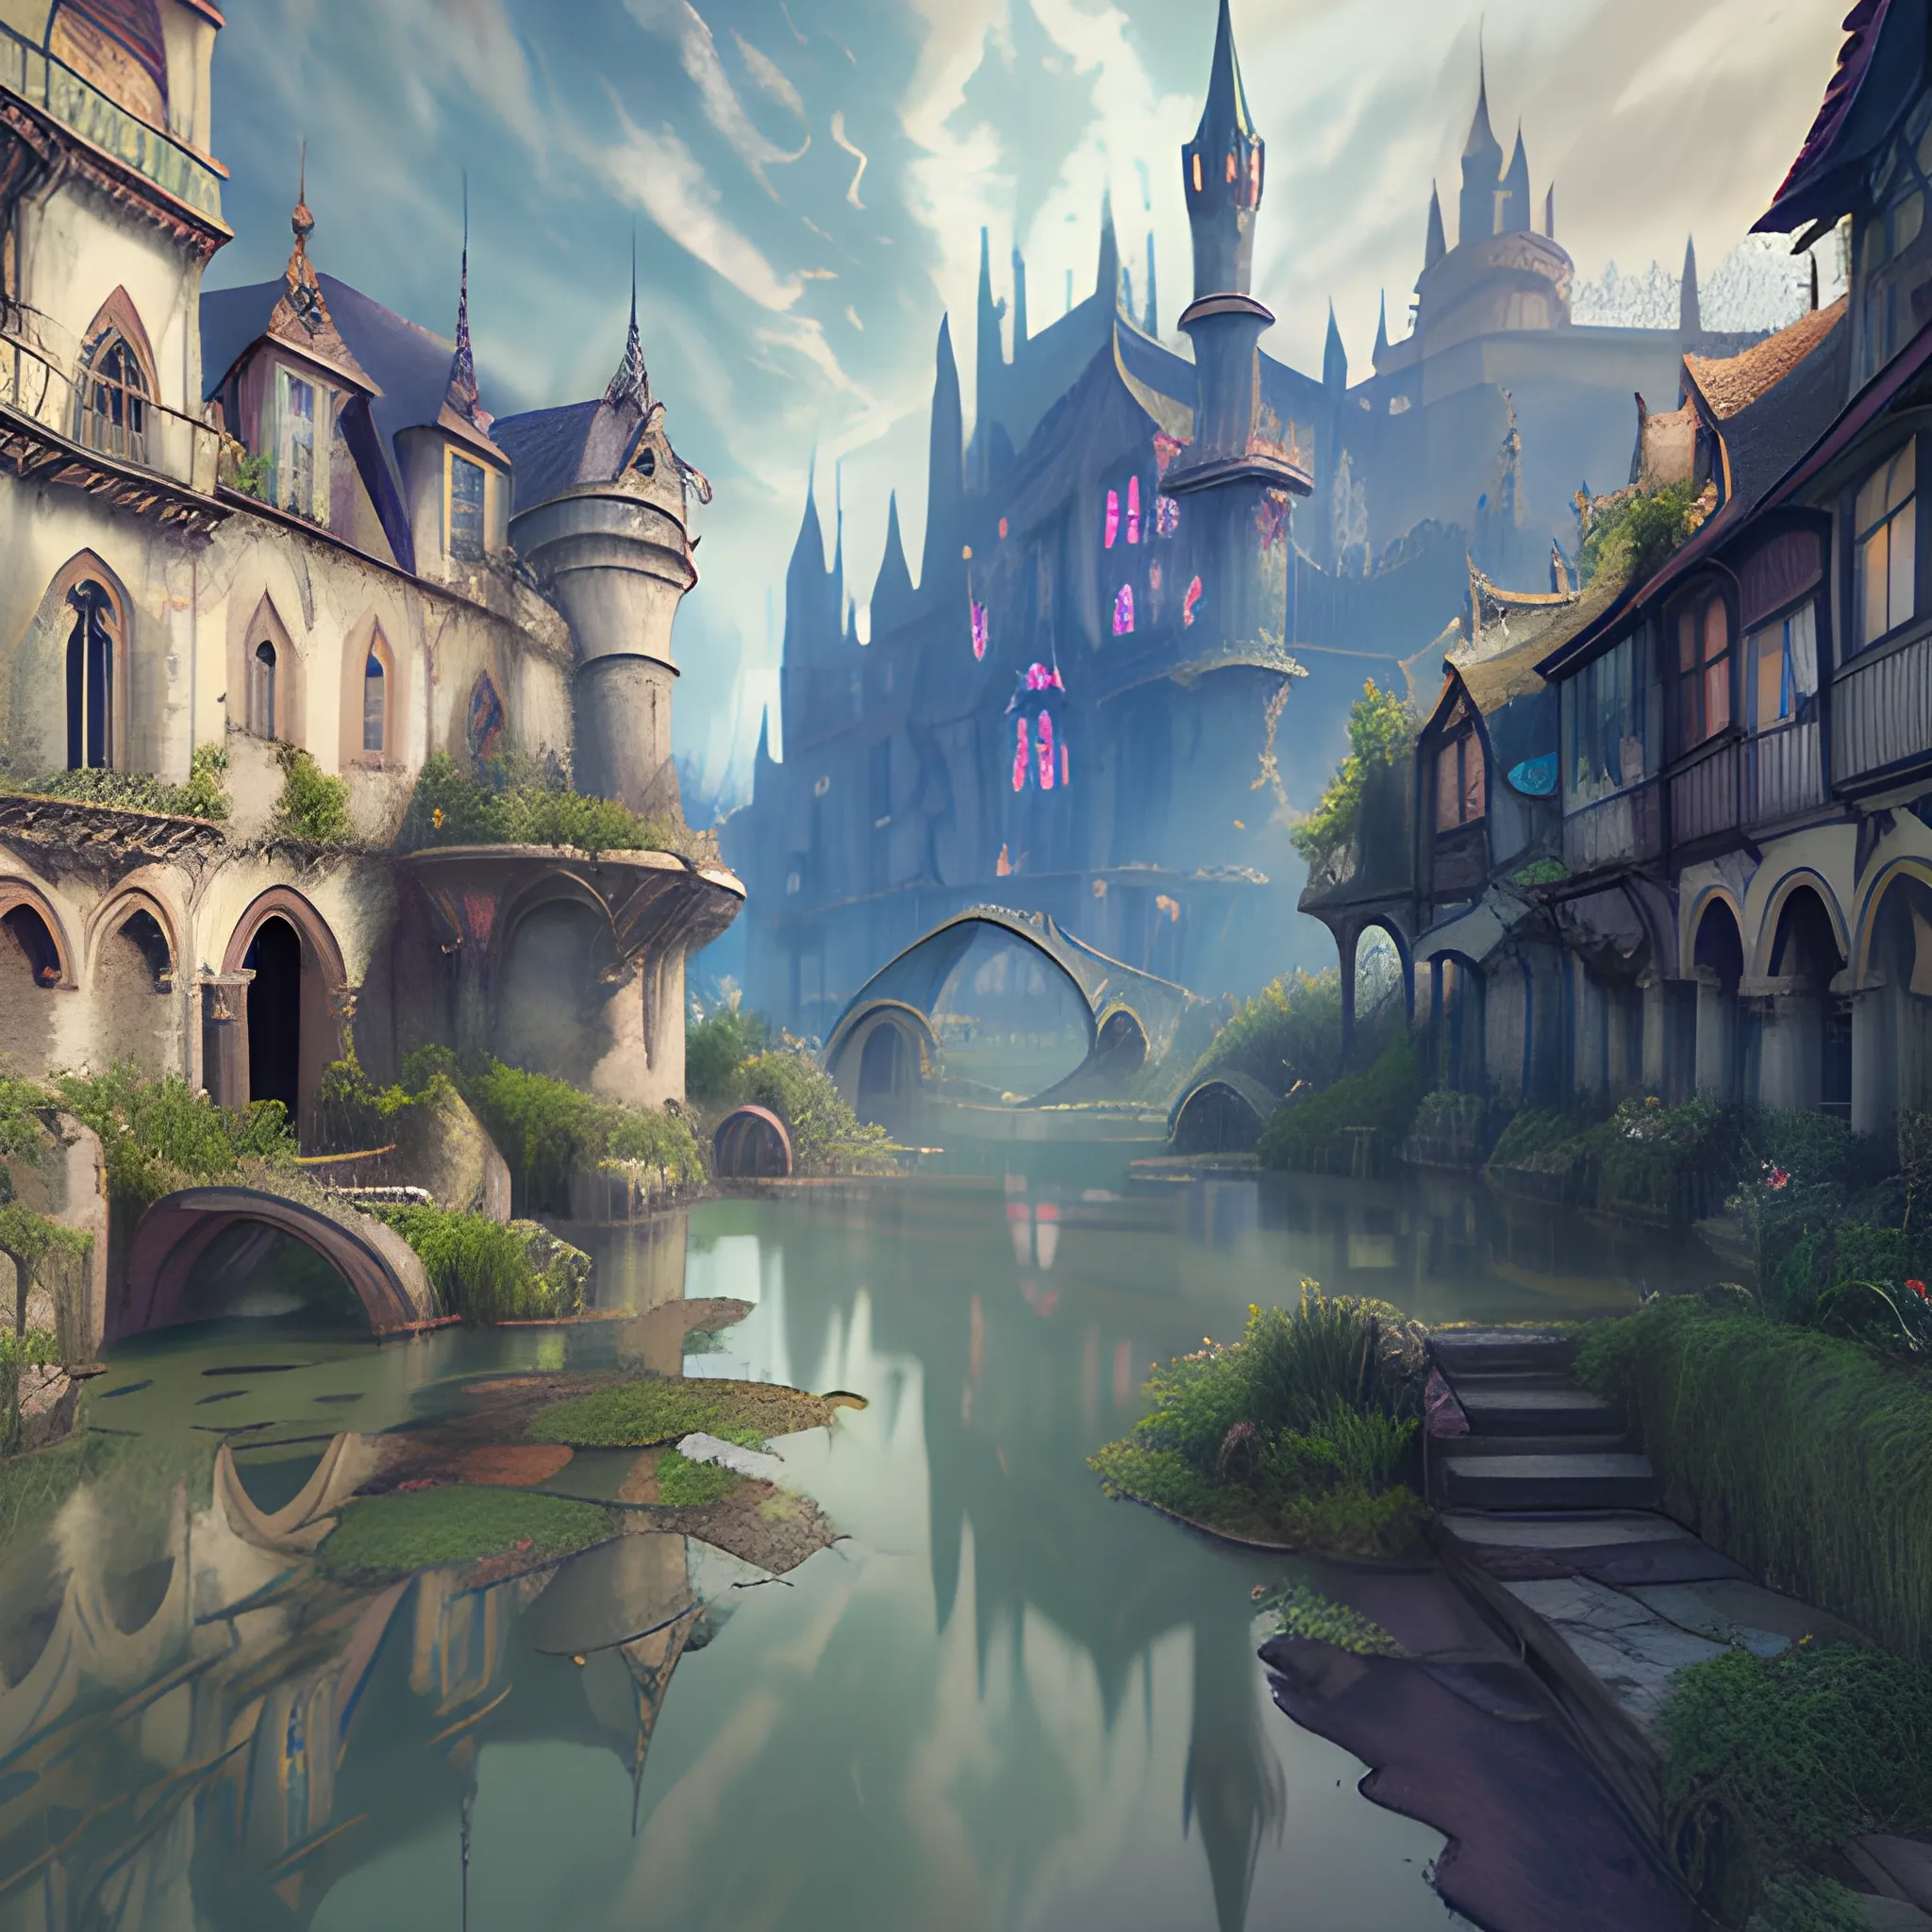 masterpiece, perspective, curious old secret flooded medieval city, cascading armor shops and potion shops, art nouveau, animation art, dark fantasy, overgrown with lush vegetation, cinematic, smooth, detailed, hyperrealism, very small aperture, clear reflection, post production, post-processing, 8k, retouch, HDR, Super-Resolution, Soft Lighting, Ray Tracing Global Illumination, Lumen Reflections, pastel color palette, art deco, Bloodborne feeling